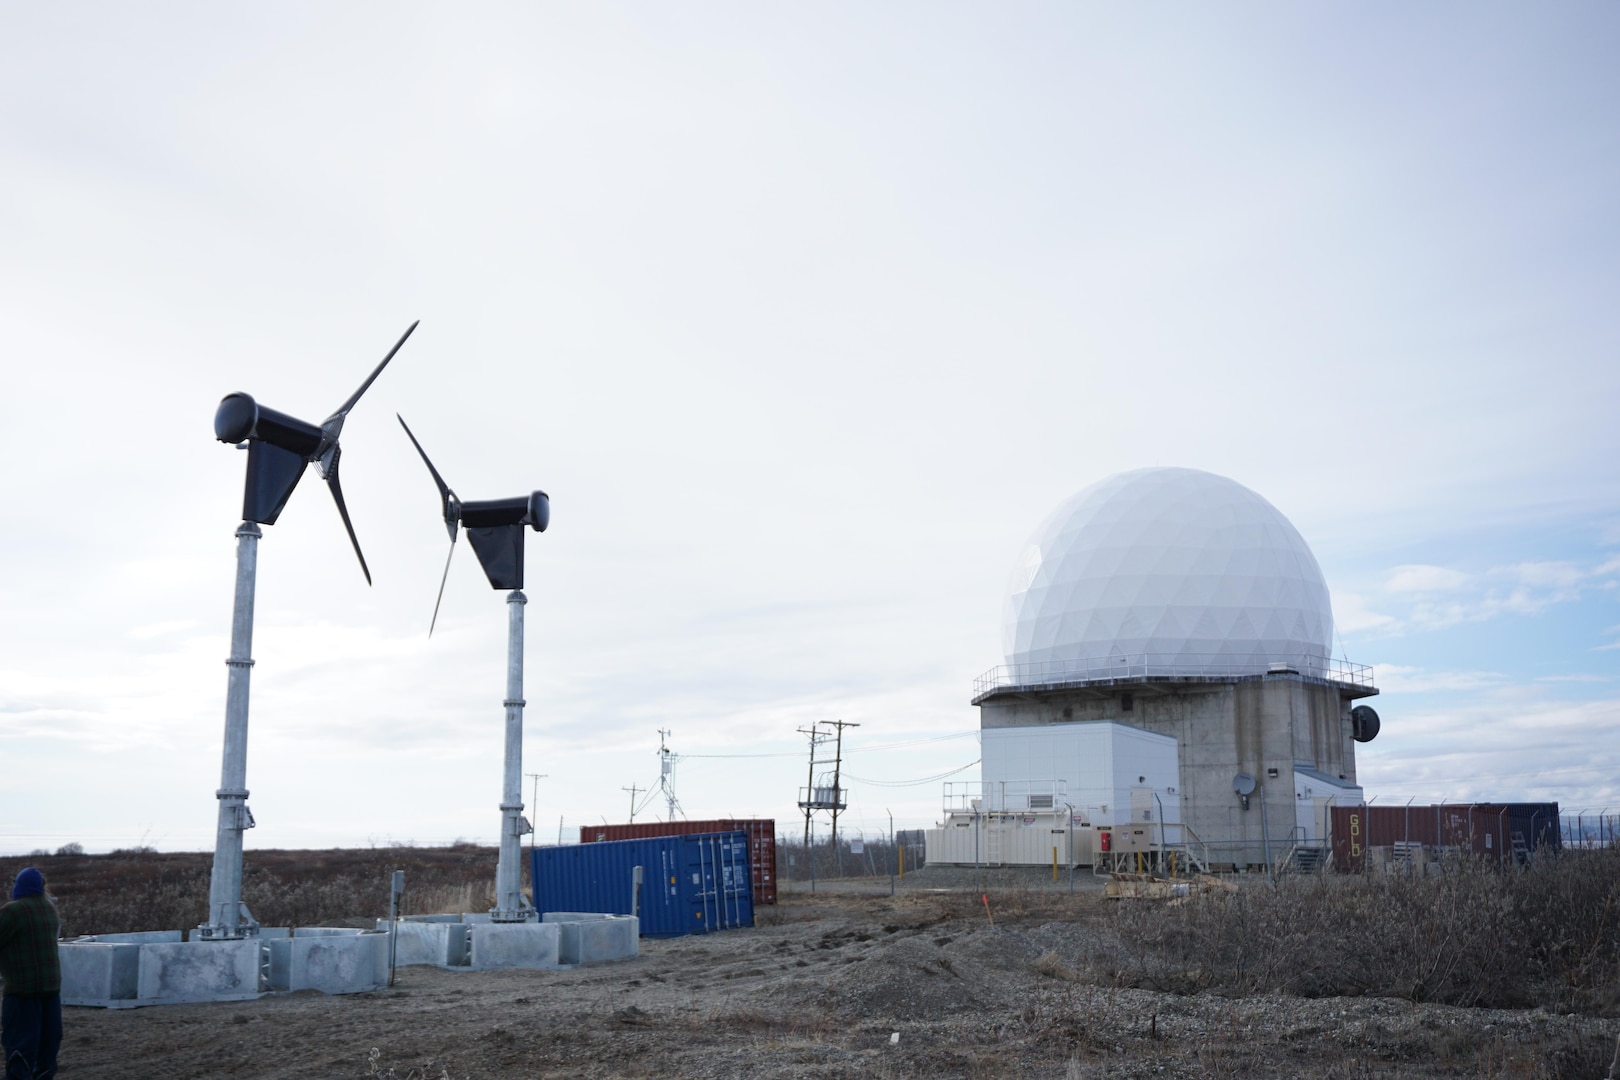 These energy-harvesting wind turbines in Kotzebue, Alaska, are part of the Energy Assurance at Remote Radar Sites project, a one-year effort managed by the AFRL Advanced Power Technology Office to demonstrate rapidly-deployable, off-grid energy technologies for increased mission energy resiliency in remote locations.  (U.S. Air Force photo/Capt Jason Goins)